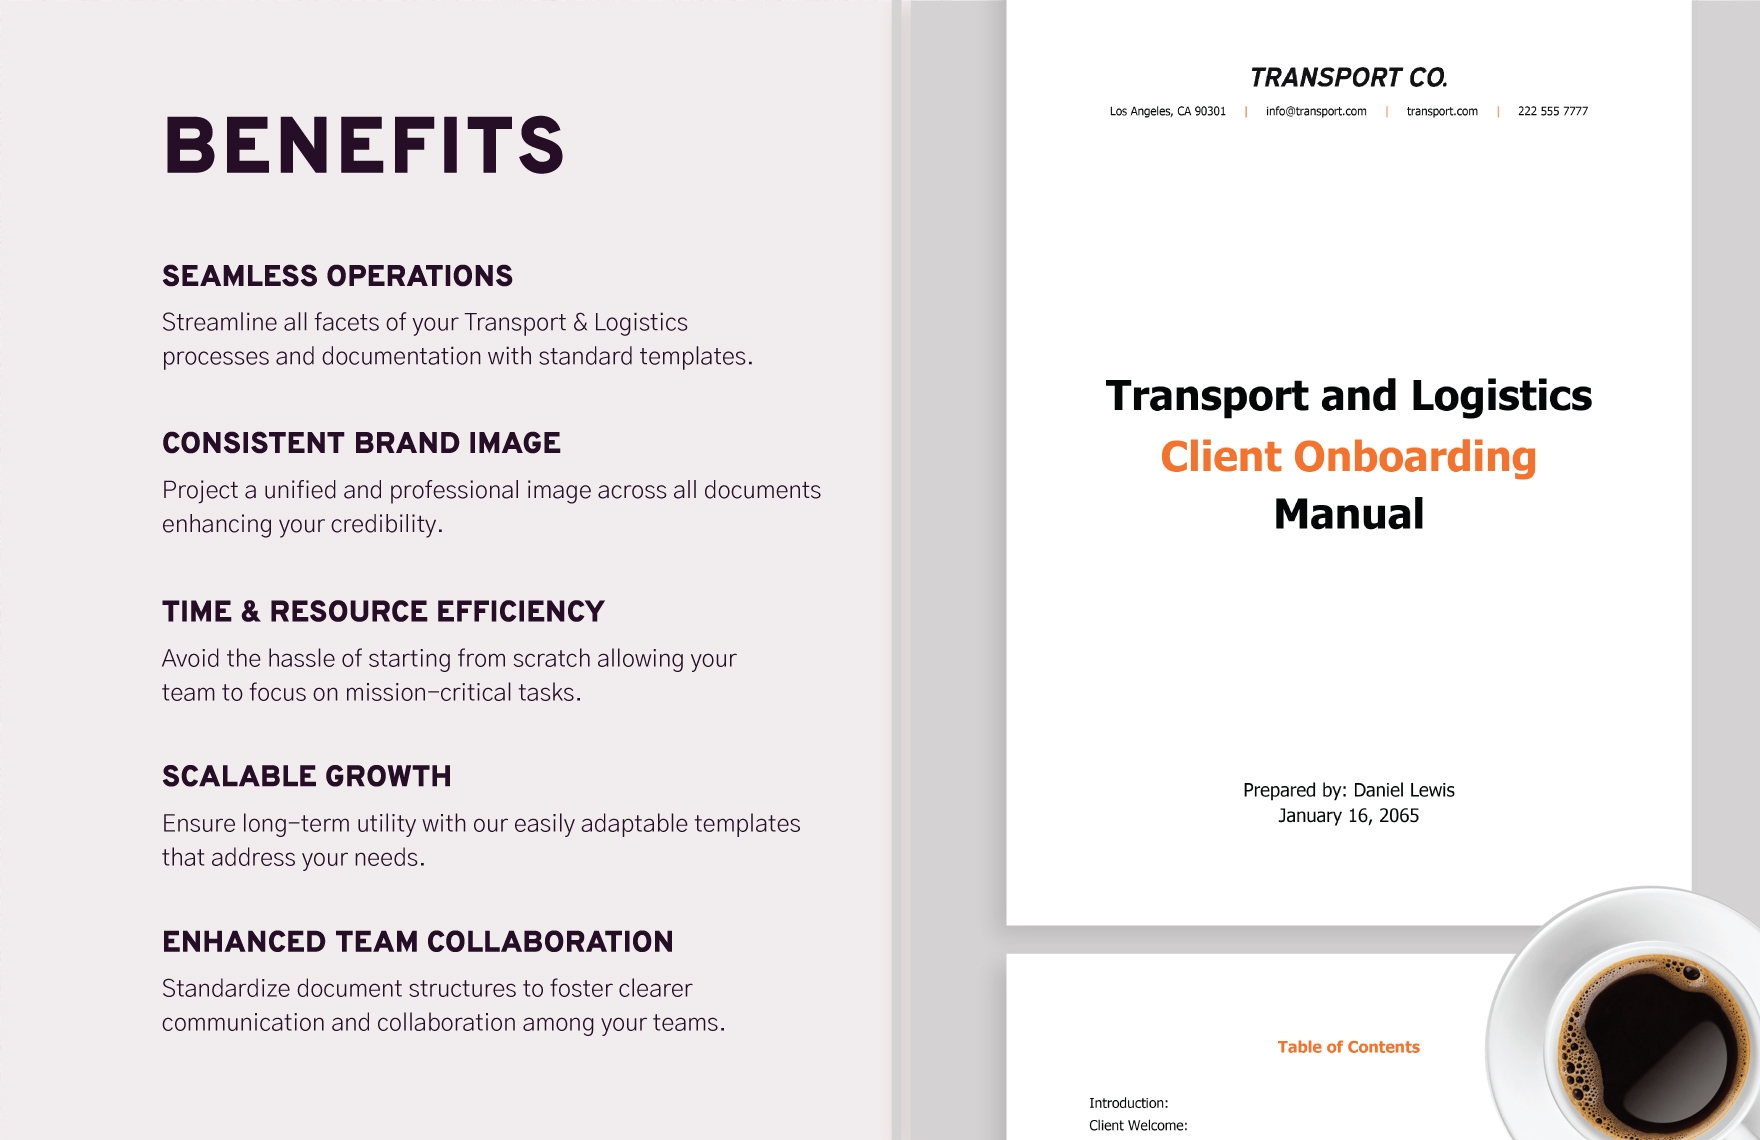 Transport and Logistics Client Onboarding Manual Template